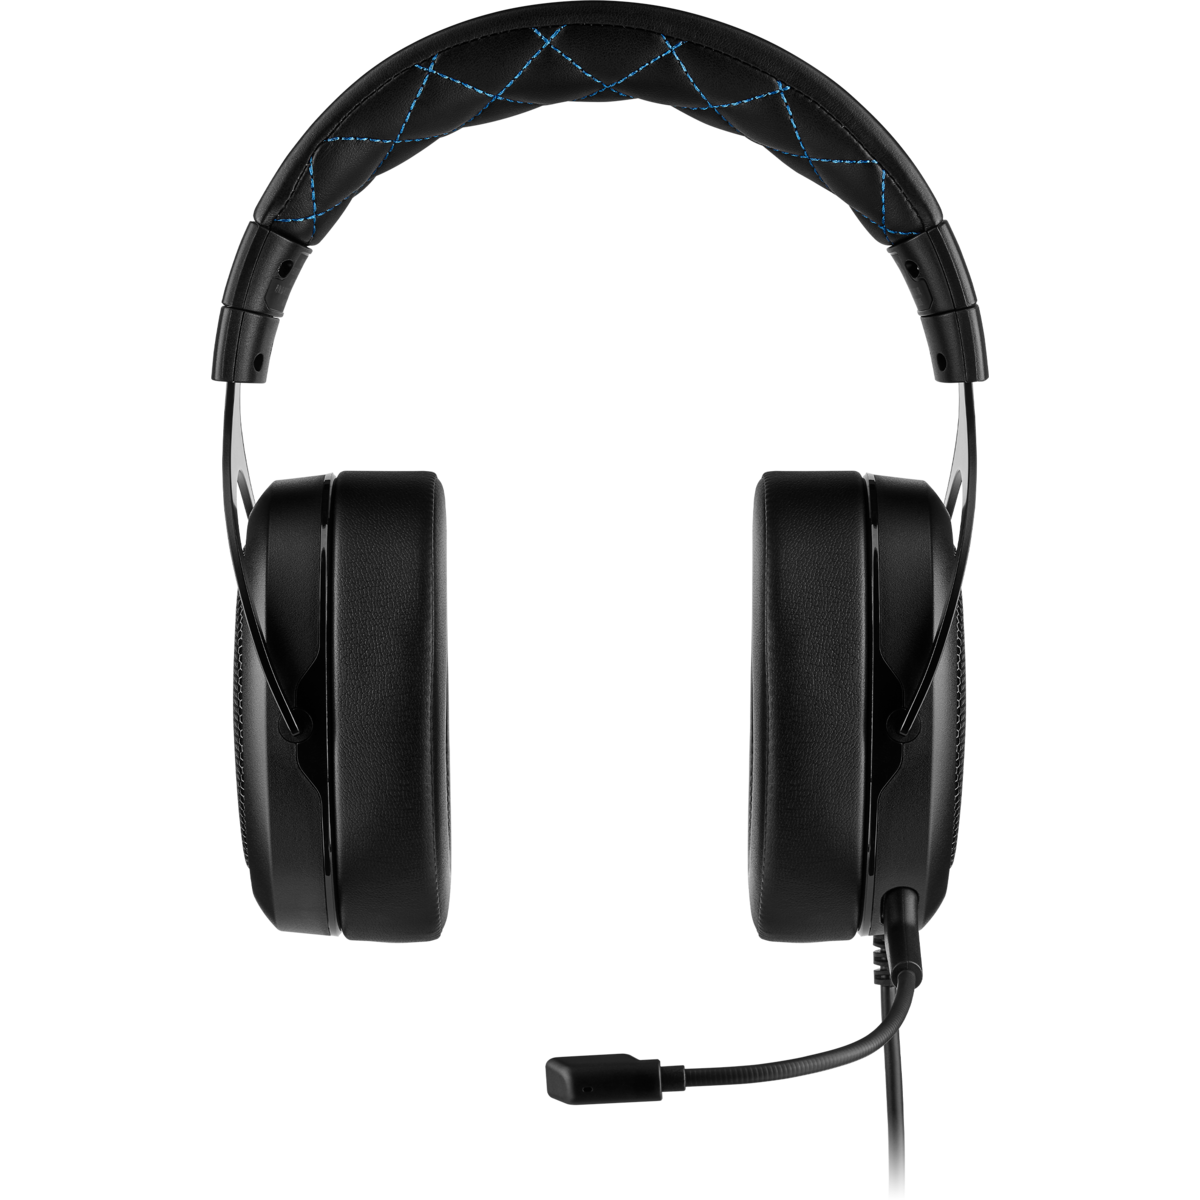 Load image into Gallery viewer, HS50 PRO STEREO Gaming Headset 電競遊戲耳機(藍色)
